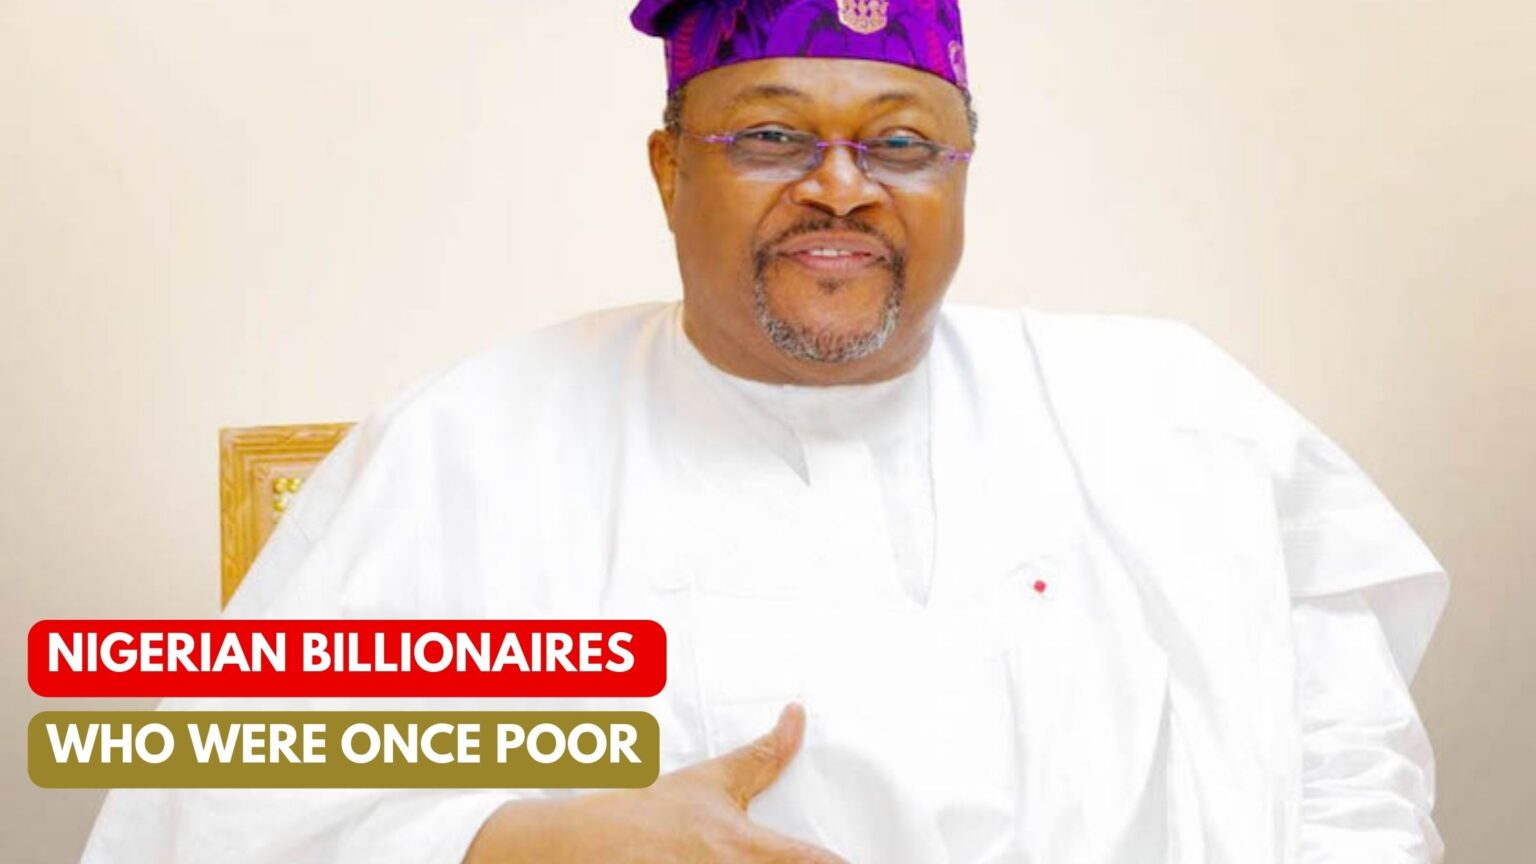 Nigerian Billionaires Who Were Once Poor